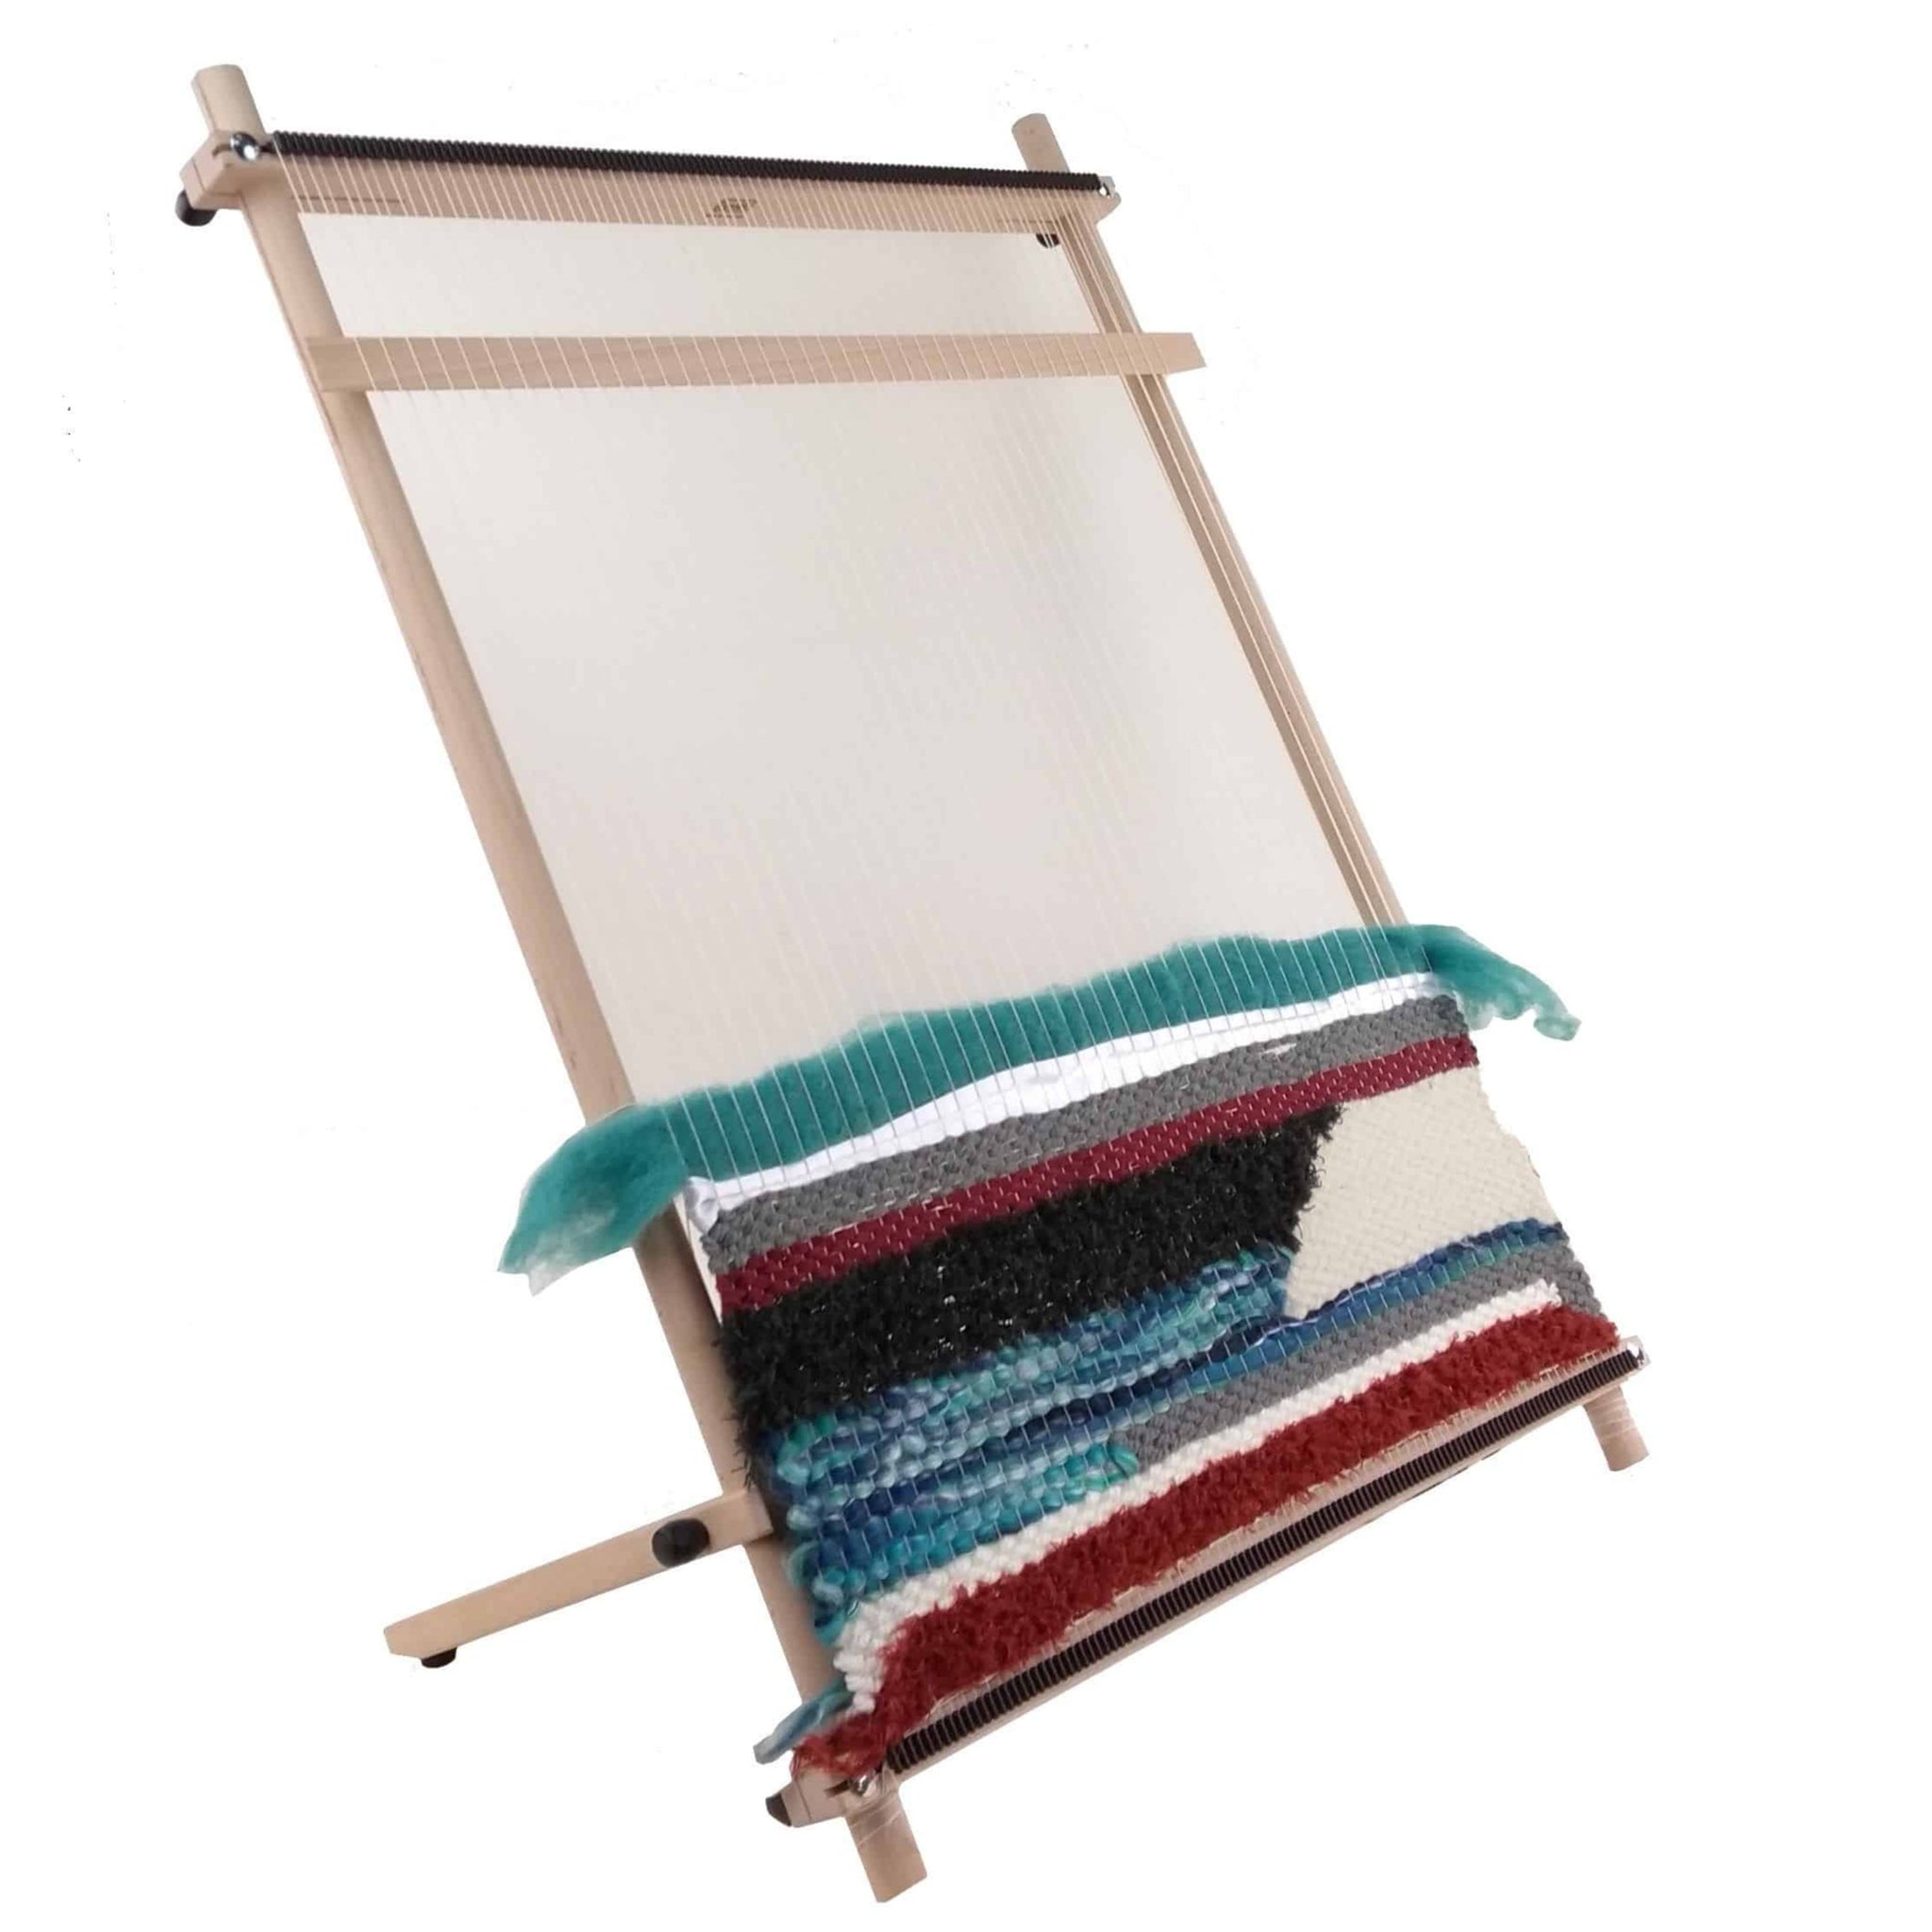 Weaving Loom Kit. Small Rectangular Lap Loom. Learn to Frame Weave,  Tapestry. Beginners Learn to Weave. 